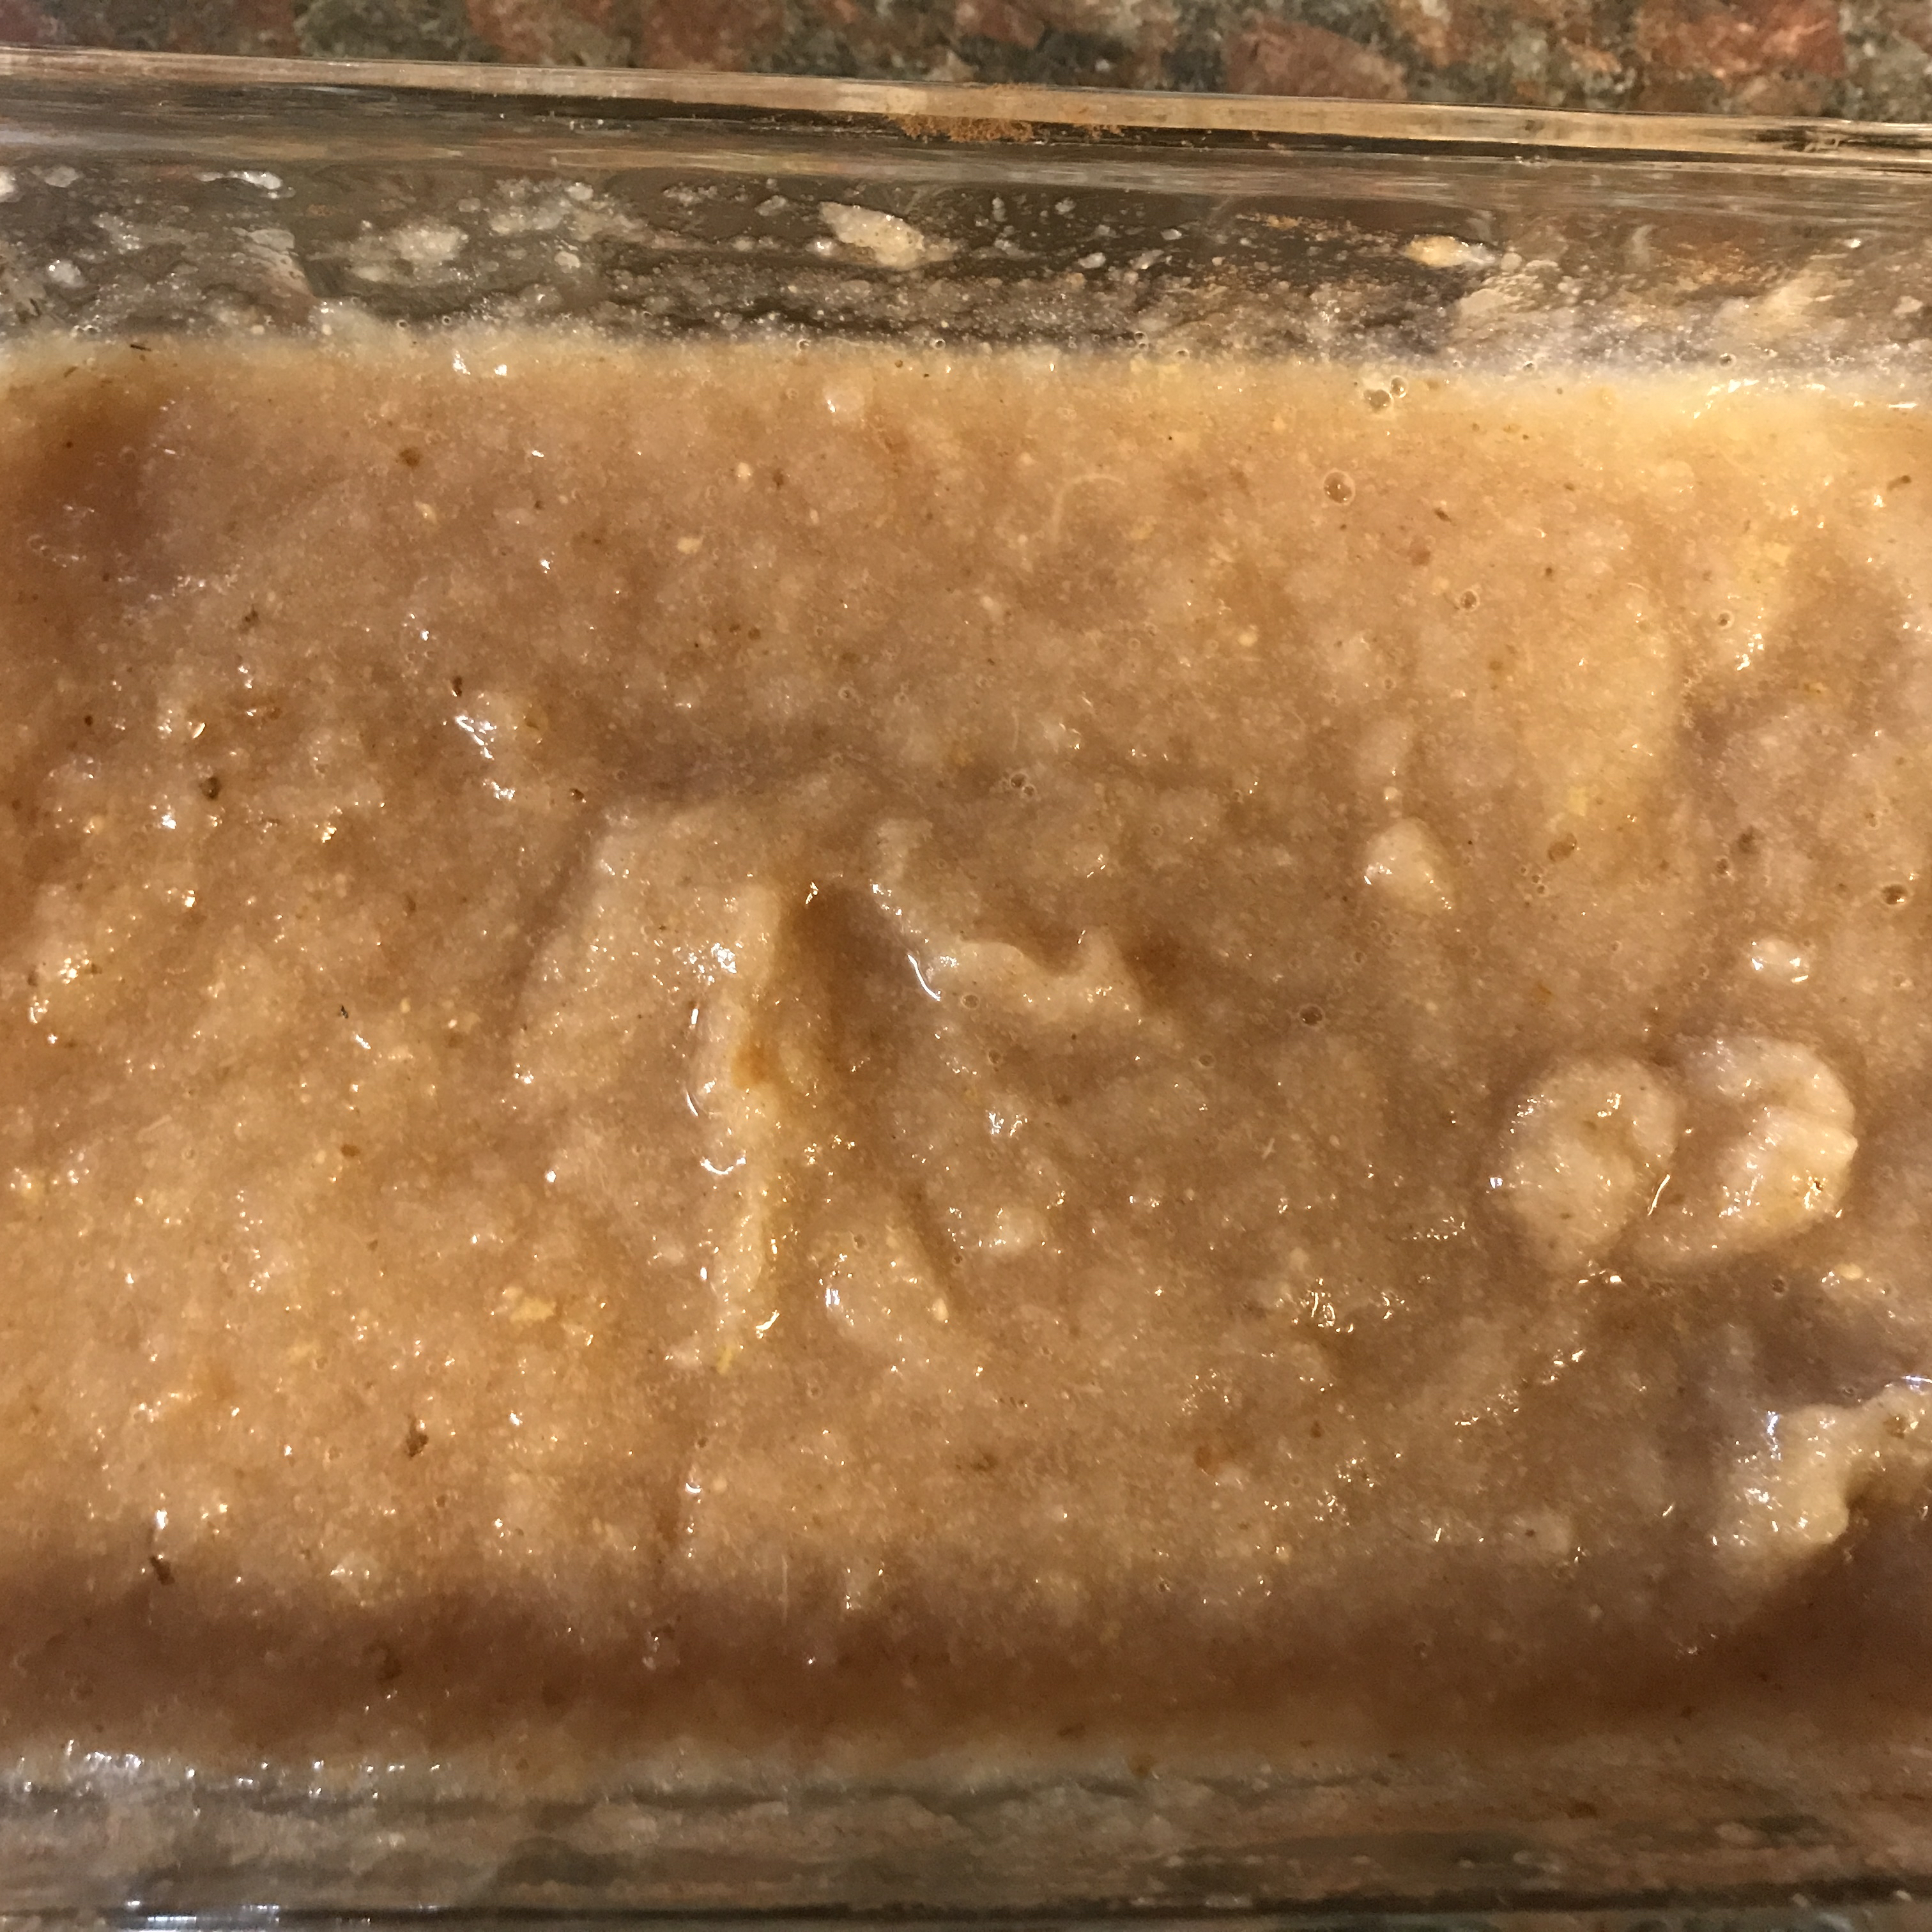 Irresistible Apple Pear Sauce: Fall’s Perfect Pairing